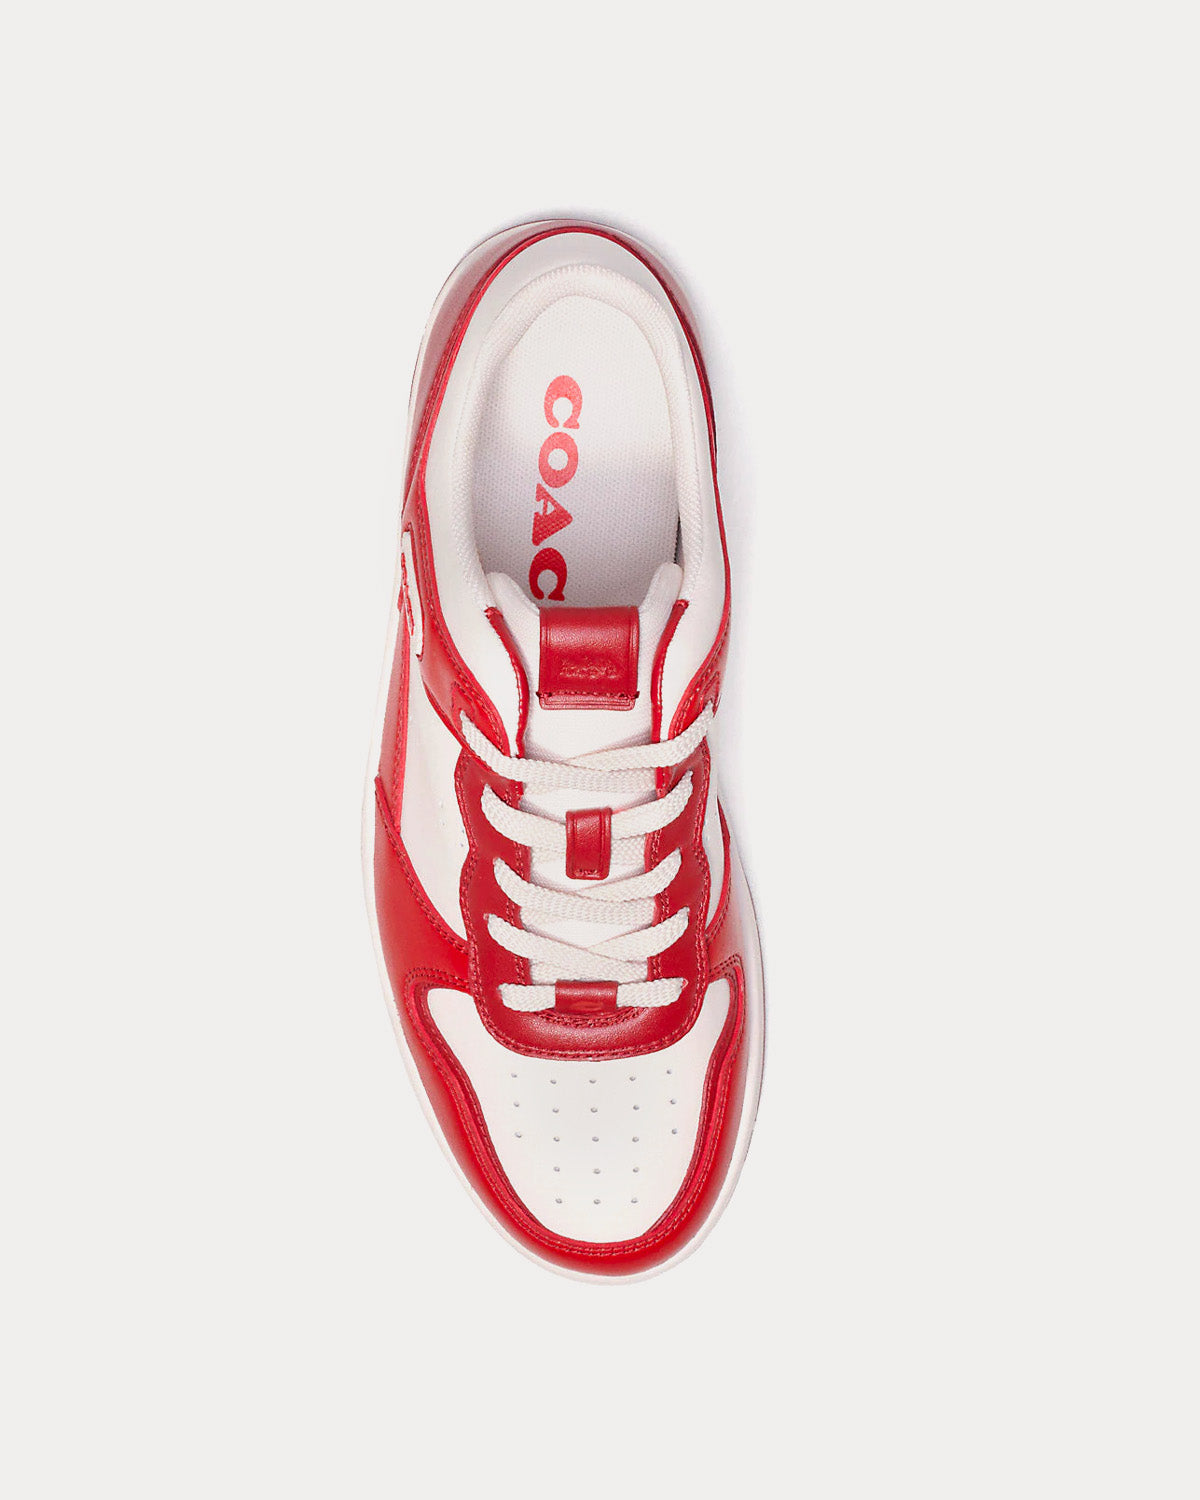 Coach - C201 Sport Red Low Top Sneakers